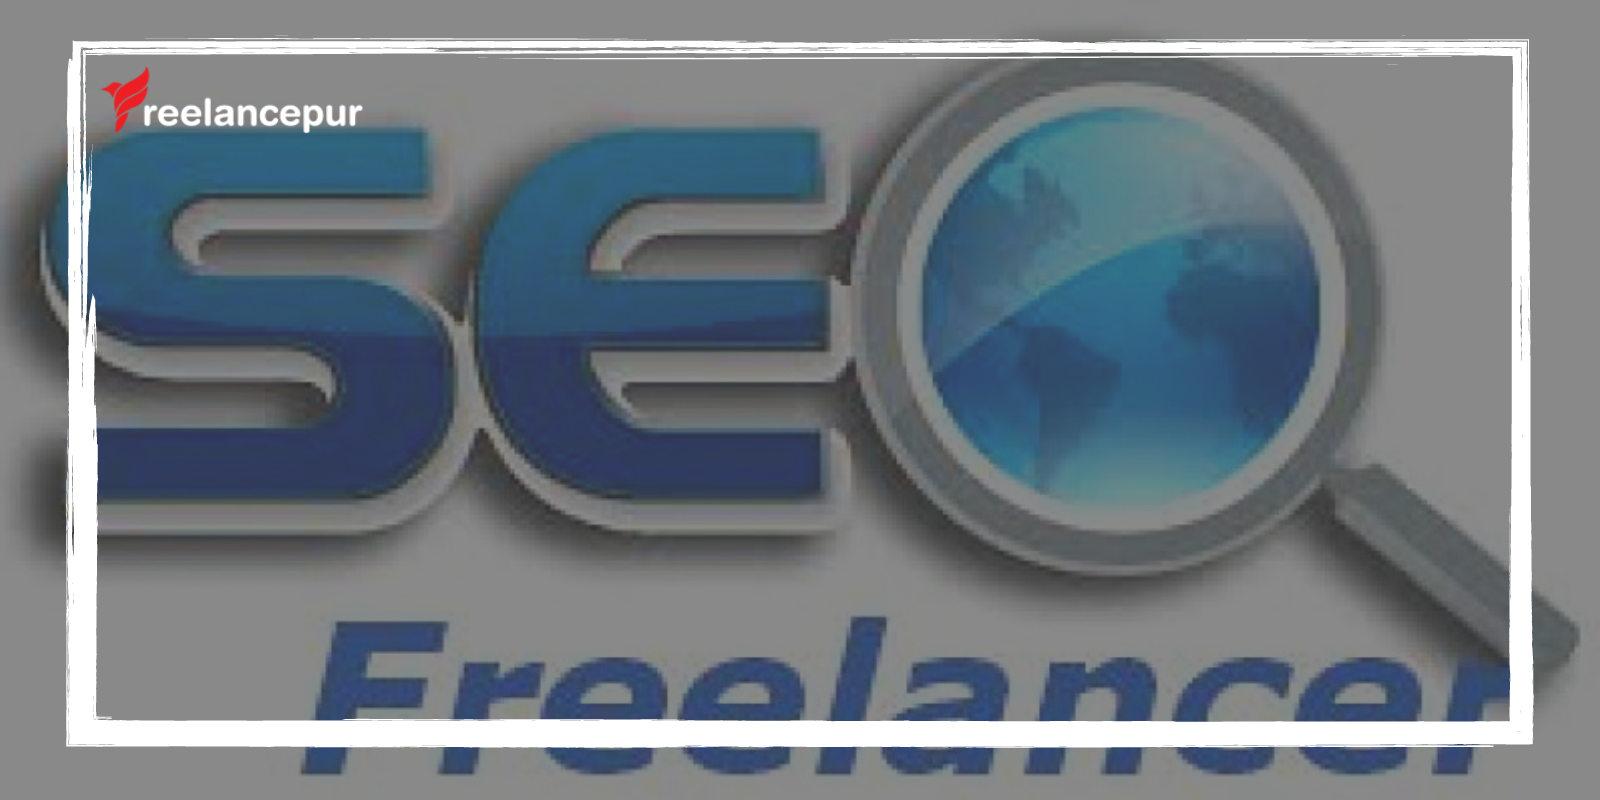 All SEOs always focus on the strategy to generate high-quality backlinks because they know the significance of it.